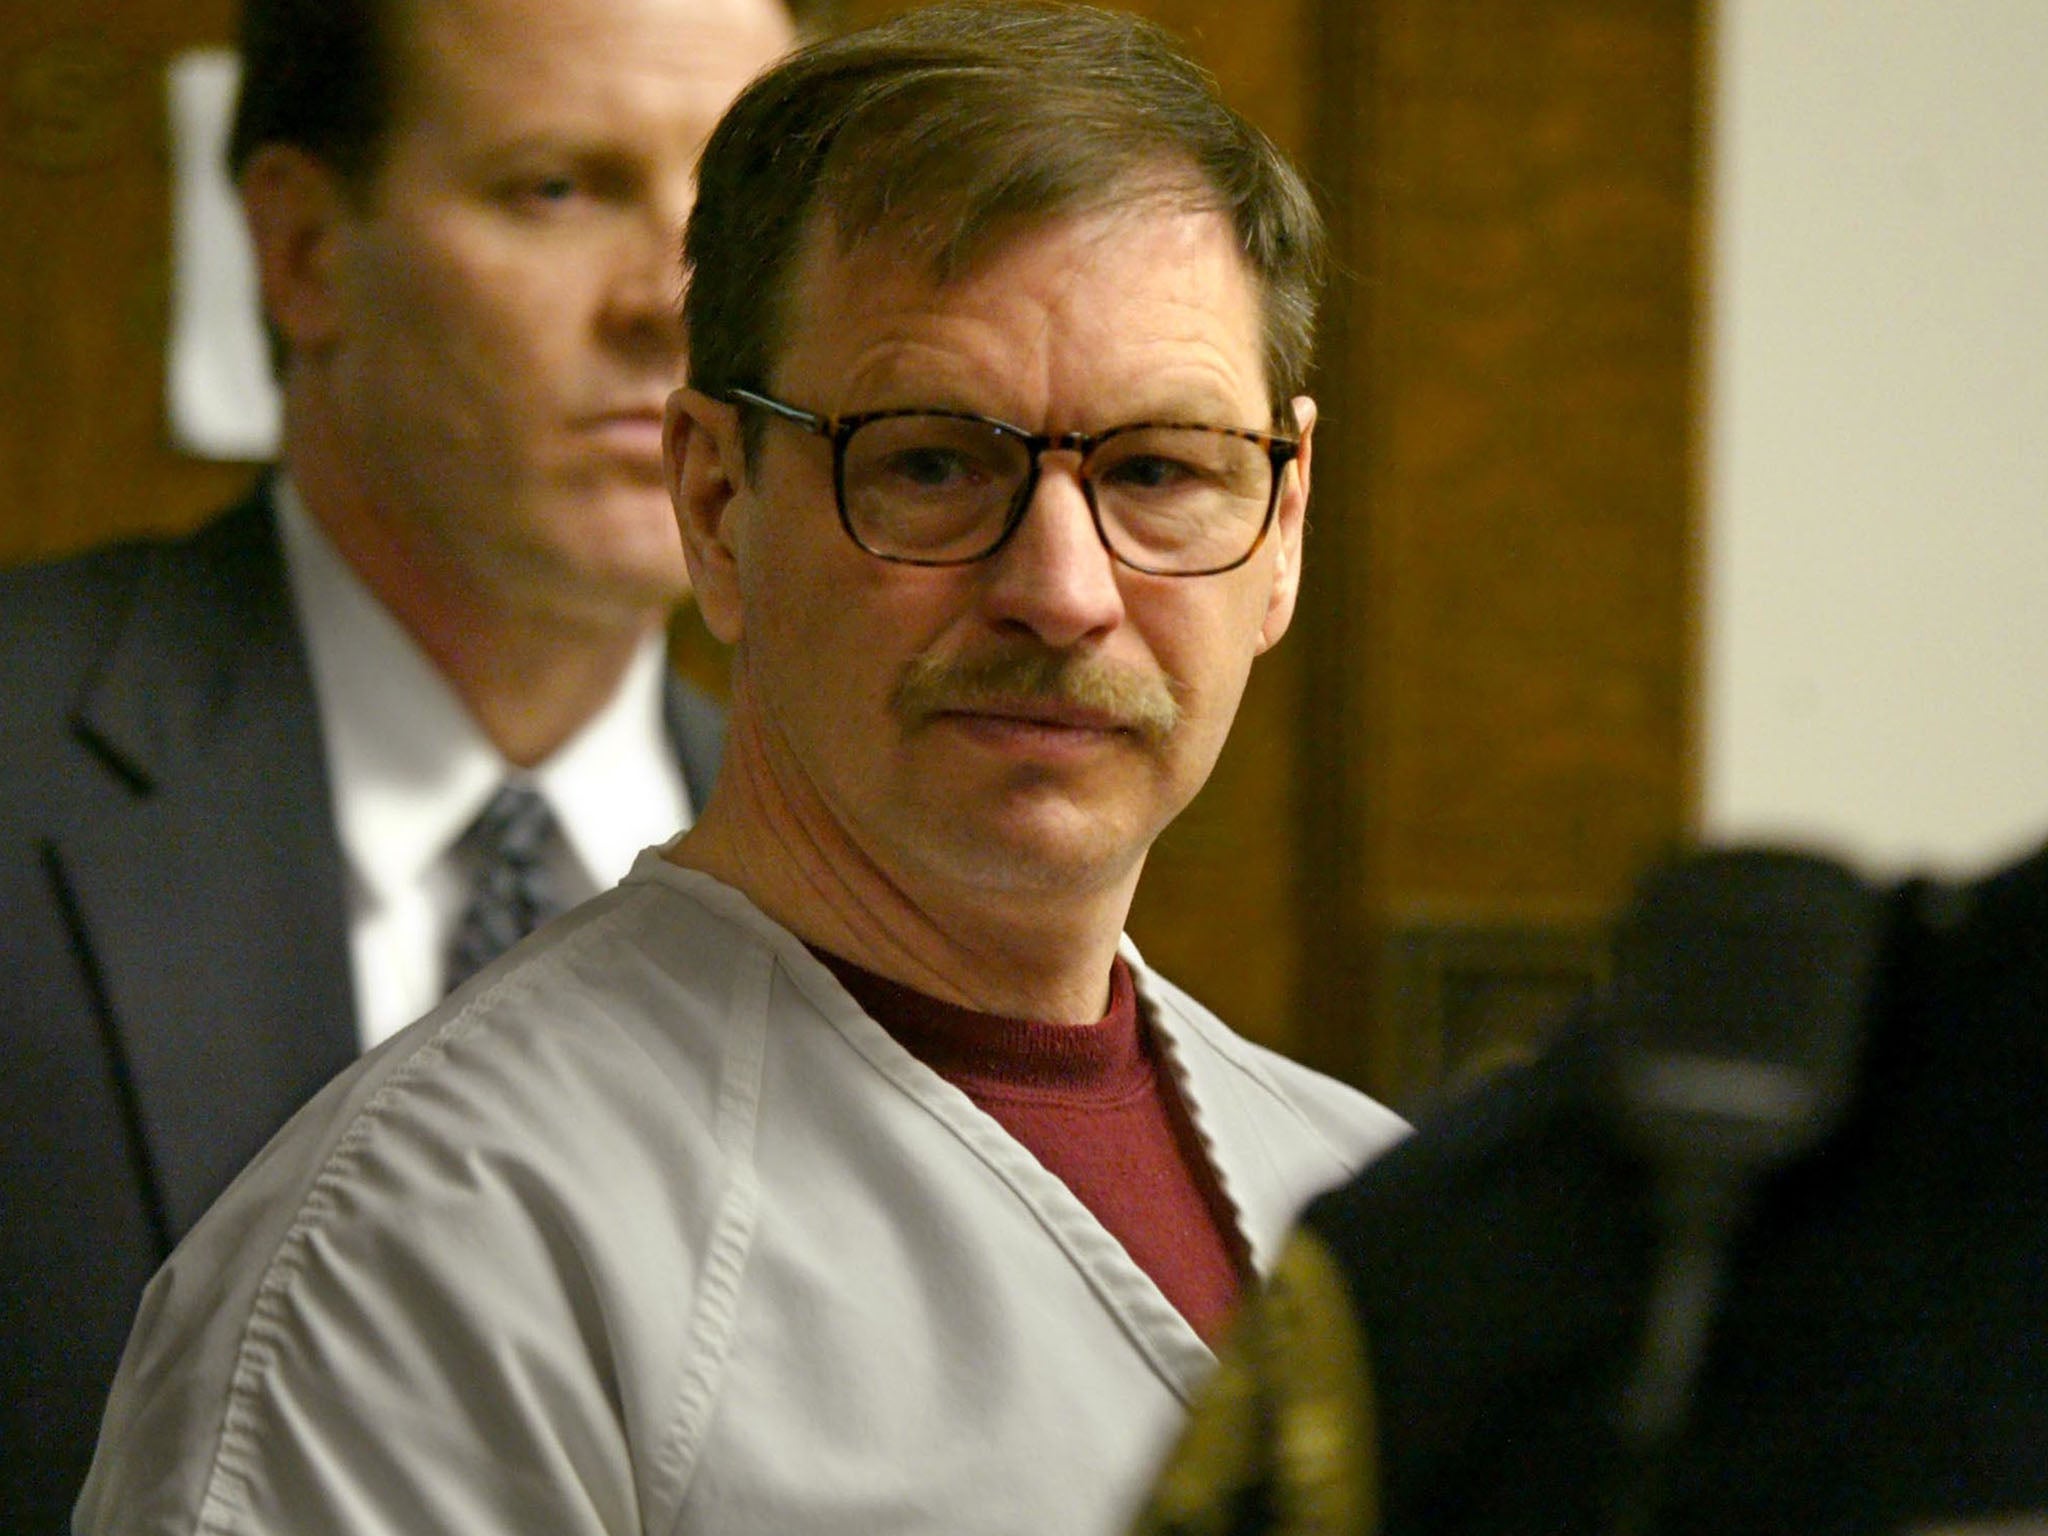 Gary Ridgway was sentenced in 2003 and is serving life without the possibility of parole at the Washington State Penitentiary